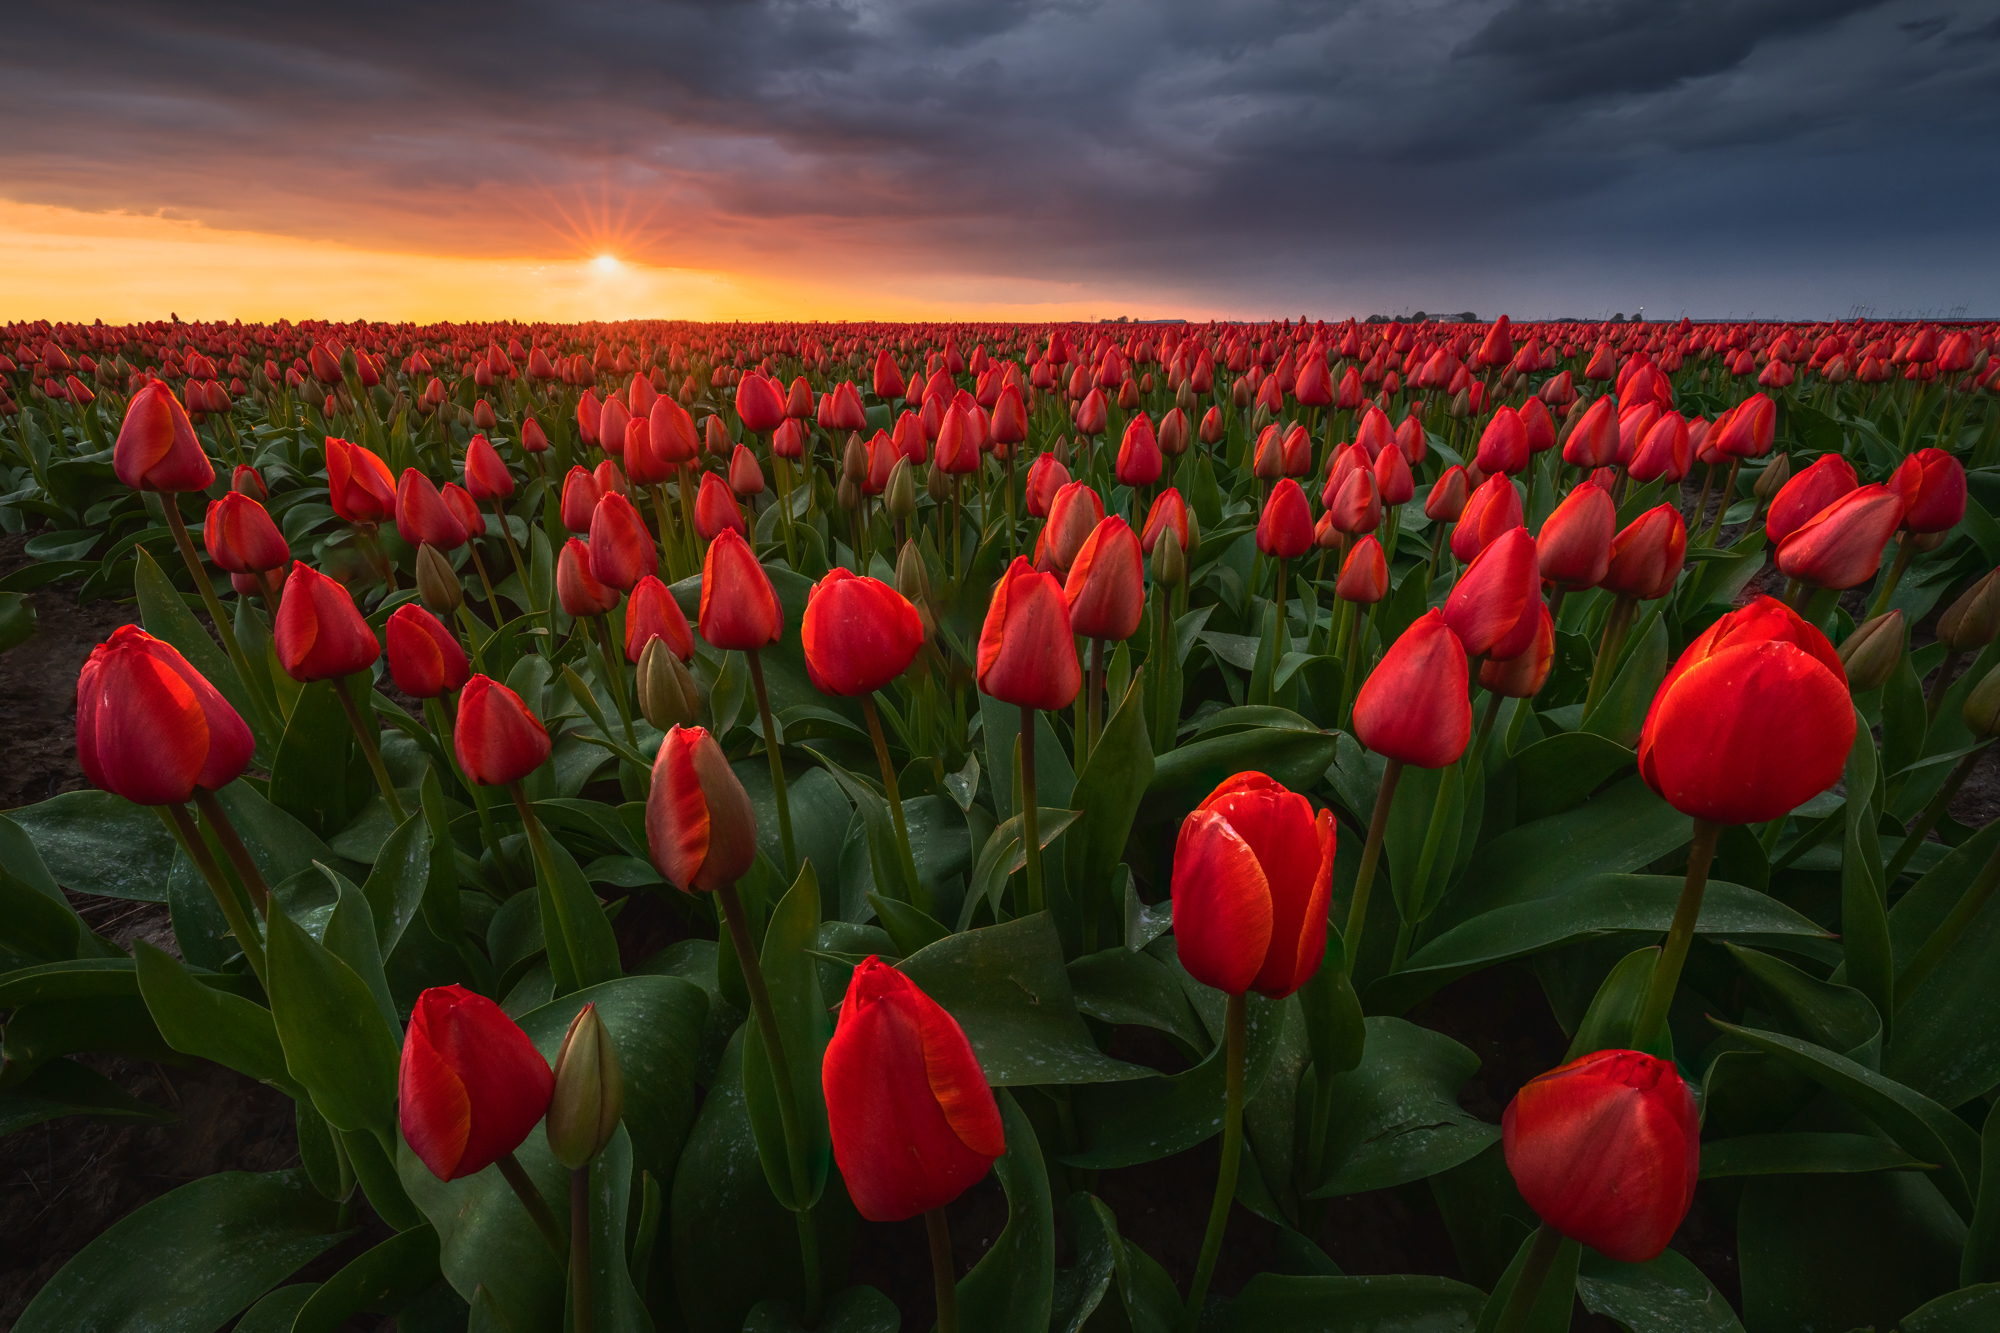 Stormy skies over the tulip fields are one of my favorite combinations to photograph.